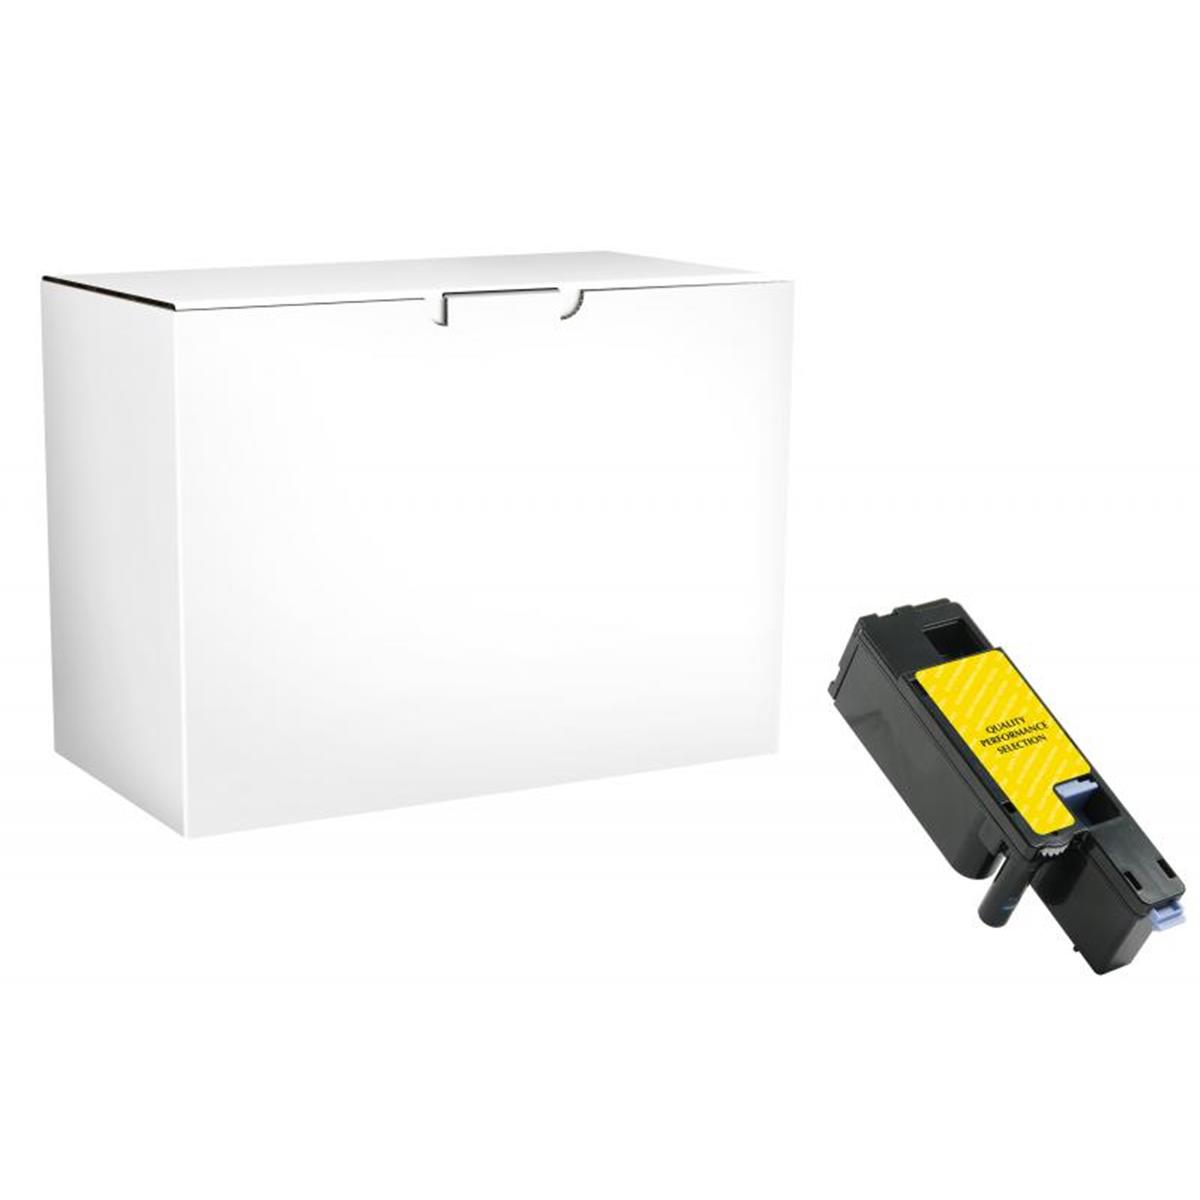 Picture of Dell 200751 Yellow Toner Cartridge for Dell C1660